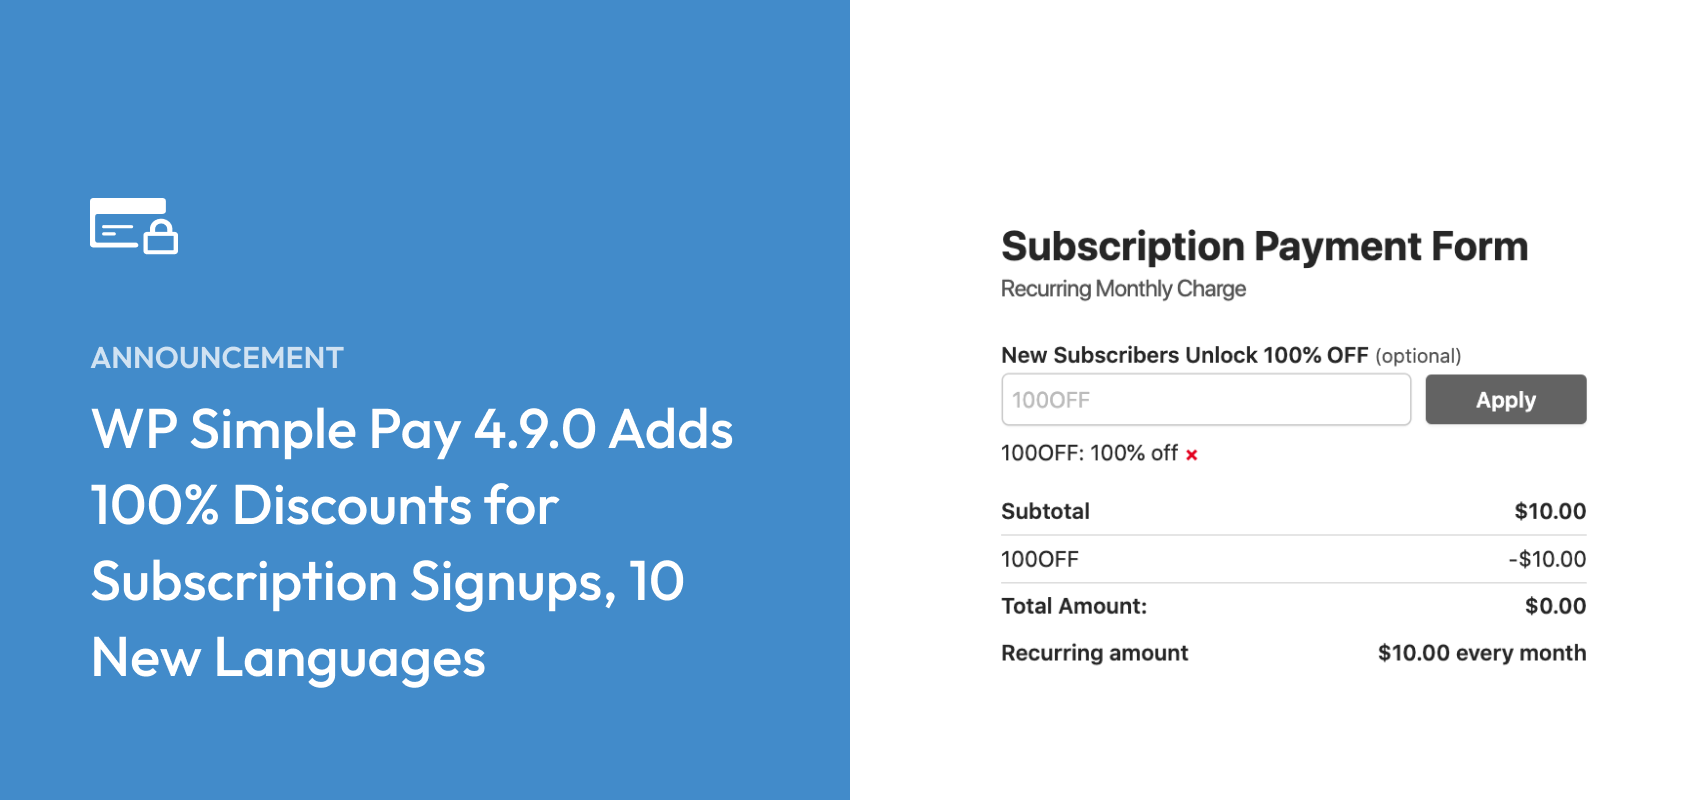 Introducing WP Simple Pay 4.9.0 – 100% Discounts for Subscription Activations, 10 New Languages, and more…